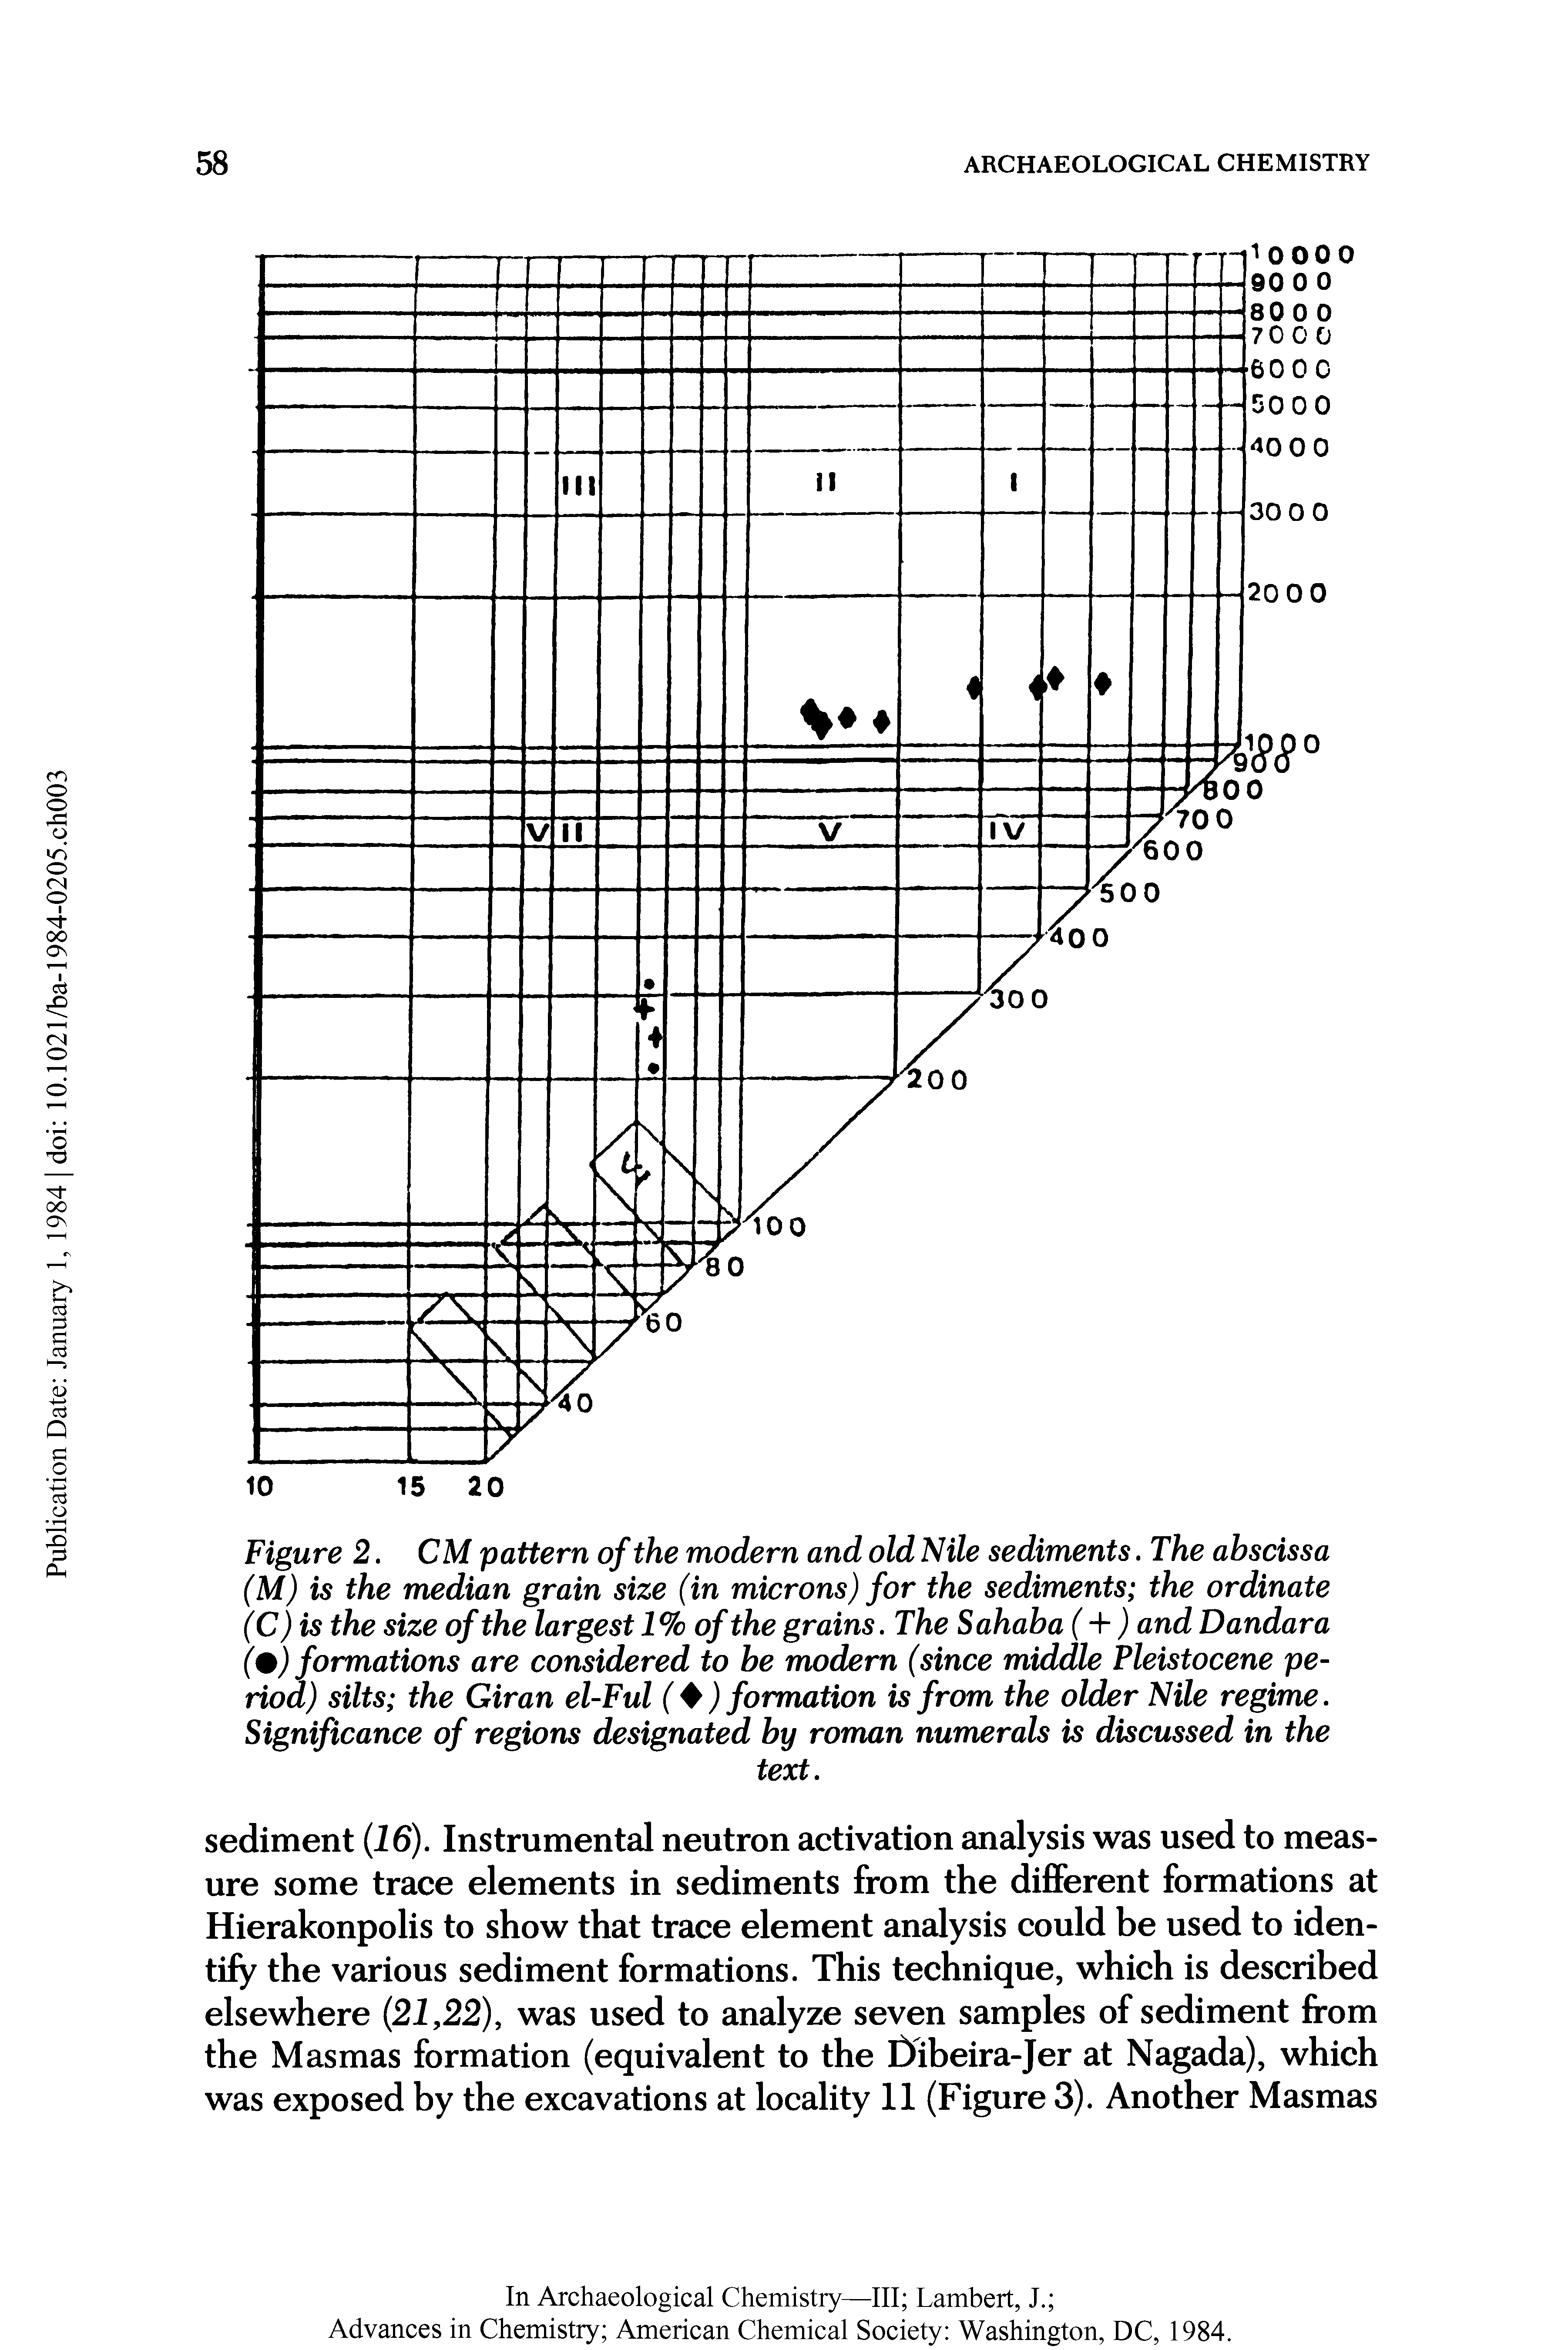 Figure 2. CM pattern of the modern and old Nile sediments. The abscissa (M) is the median grain size (in microns) for the sediments the ordinate (C) is the size of the largest 1% of the grains. The Sahaba ( + ) and Dandara (%) formations are considered to be modern (since middle Pleistocene period) silts the Giran el-Ful ( ) formation is from the older Nile regime. Significance of regions designated by roman numerals is discussed in the...